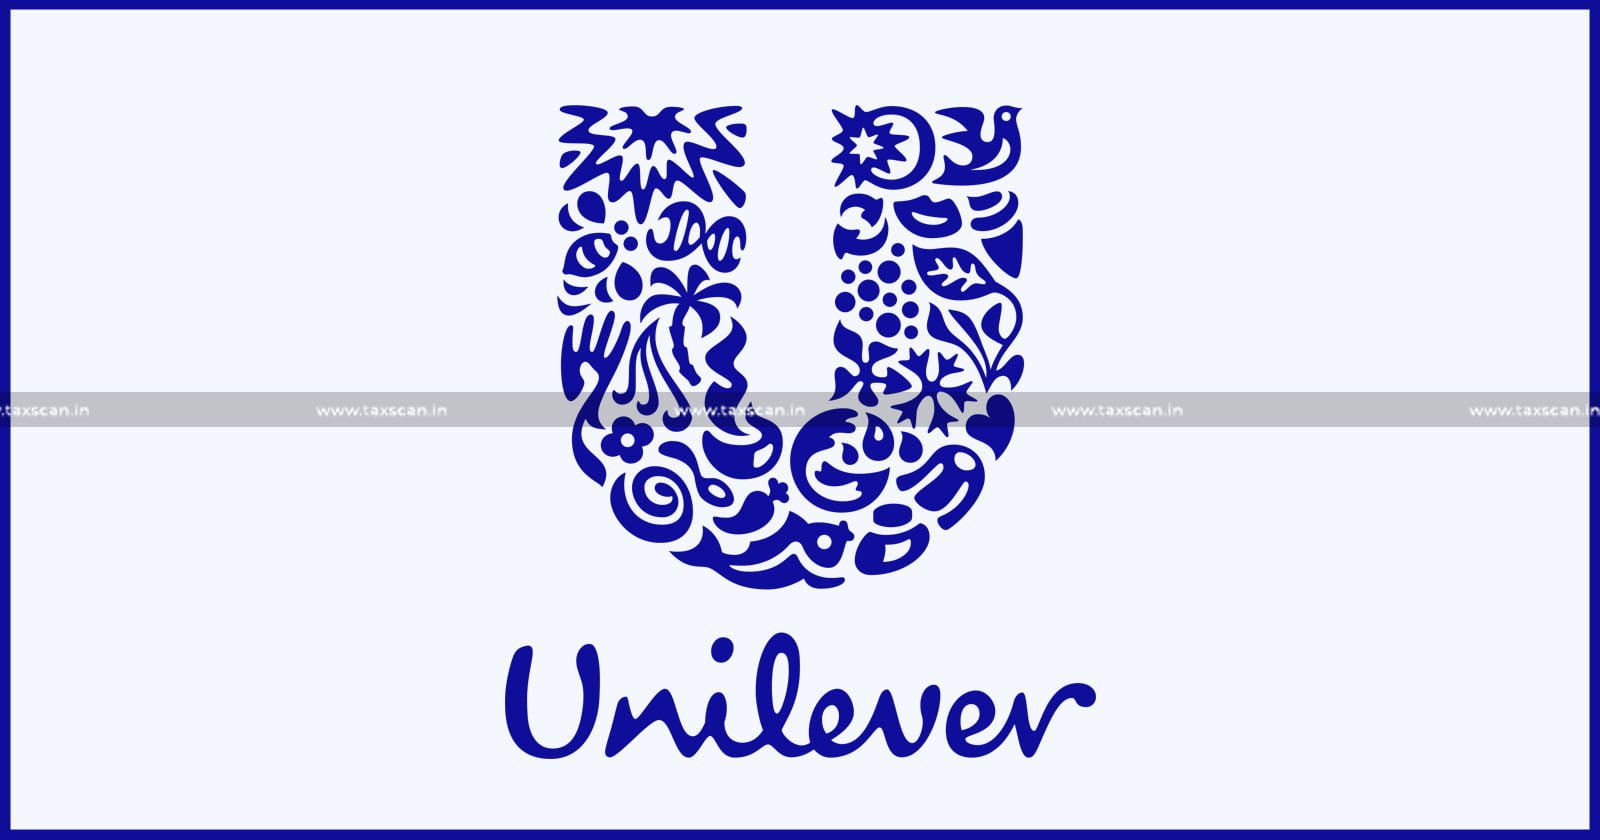 CA Vacancy - Unilever - Vacancy - CA - Vacancy in Unilever - post of Assistant Finance Manager - Assistant Finance Manager - taxscan